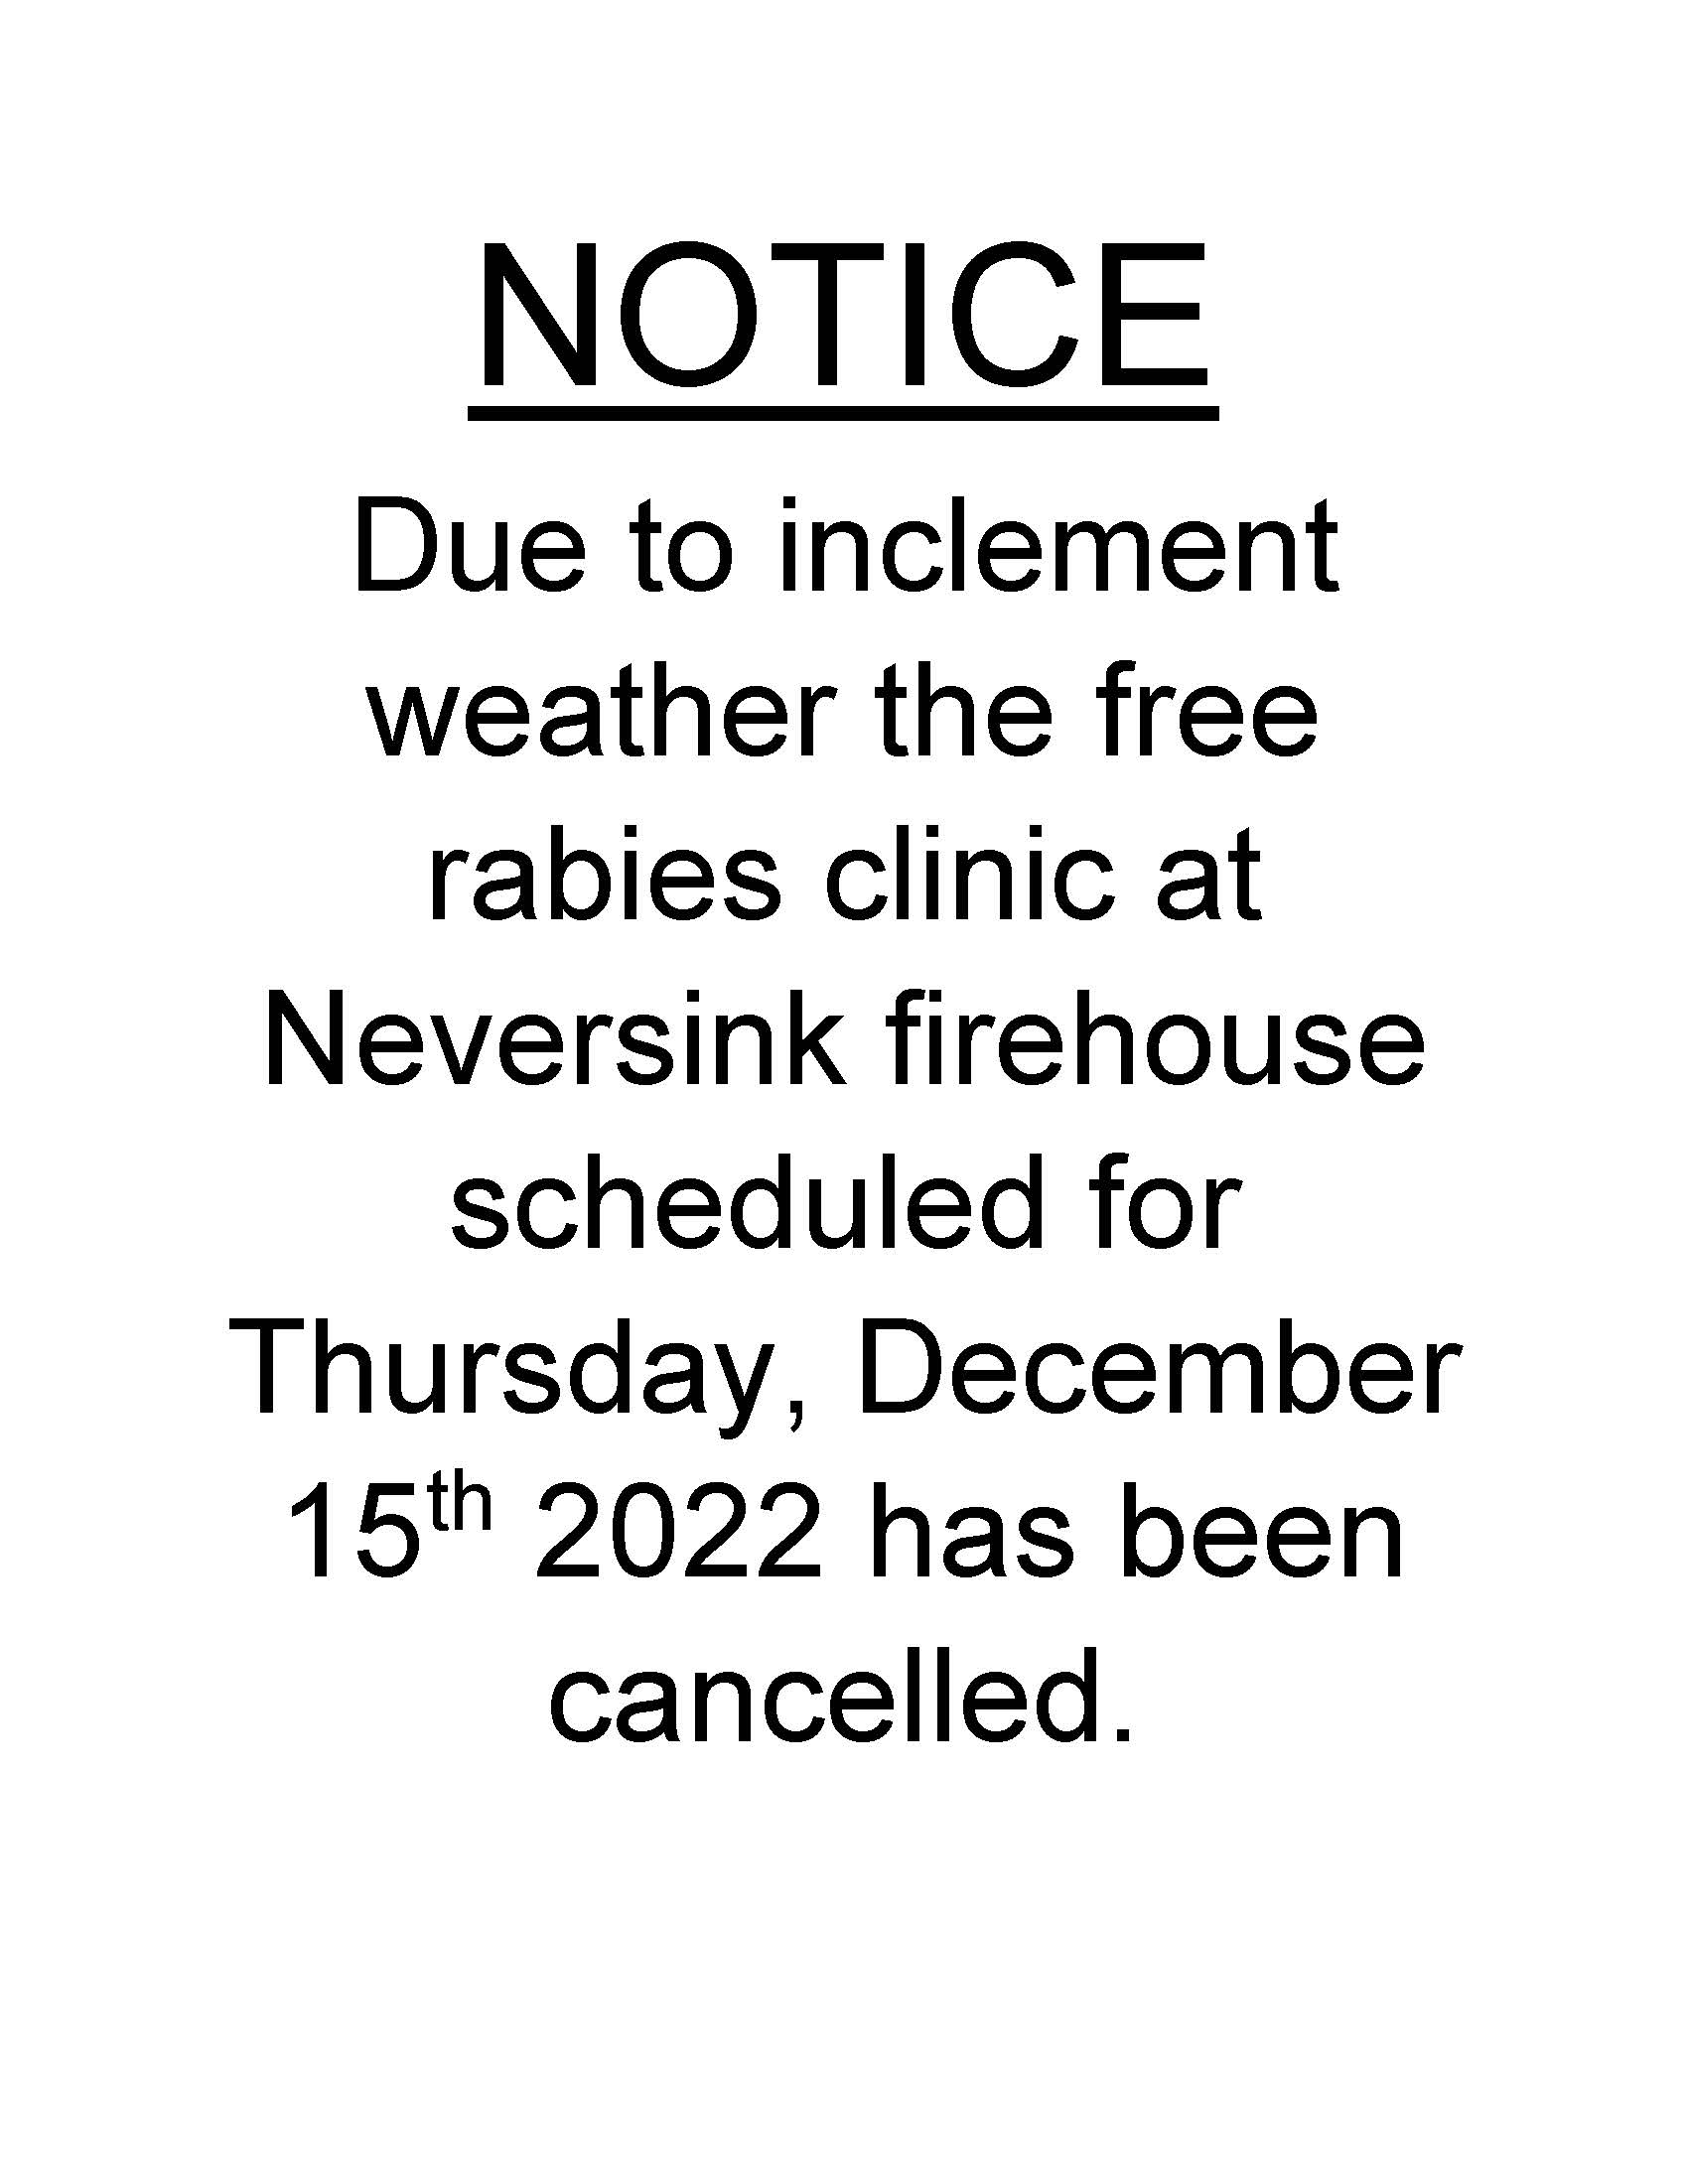 NOTICE rabies clinic